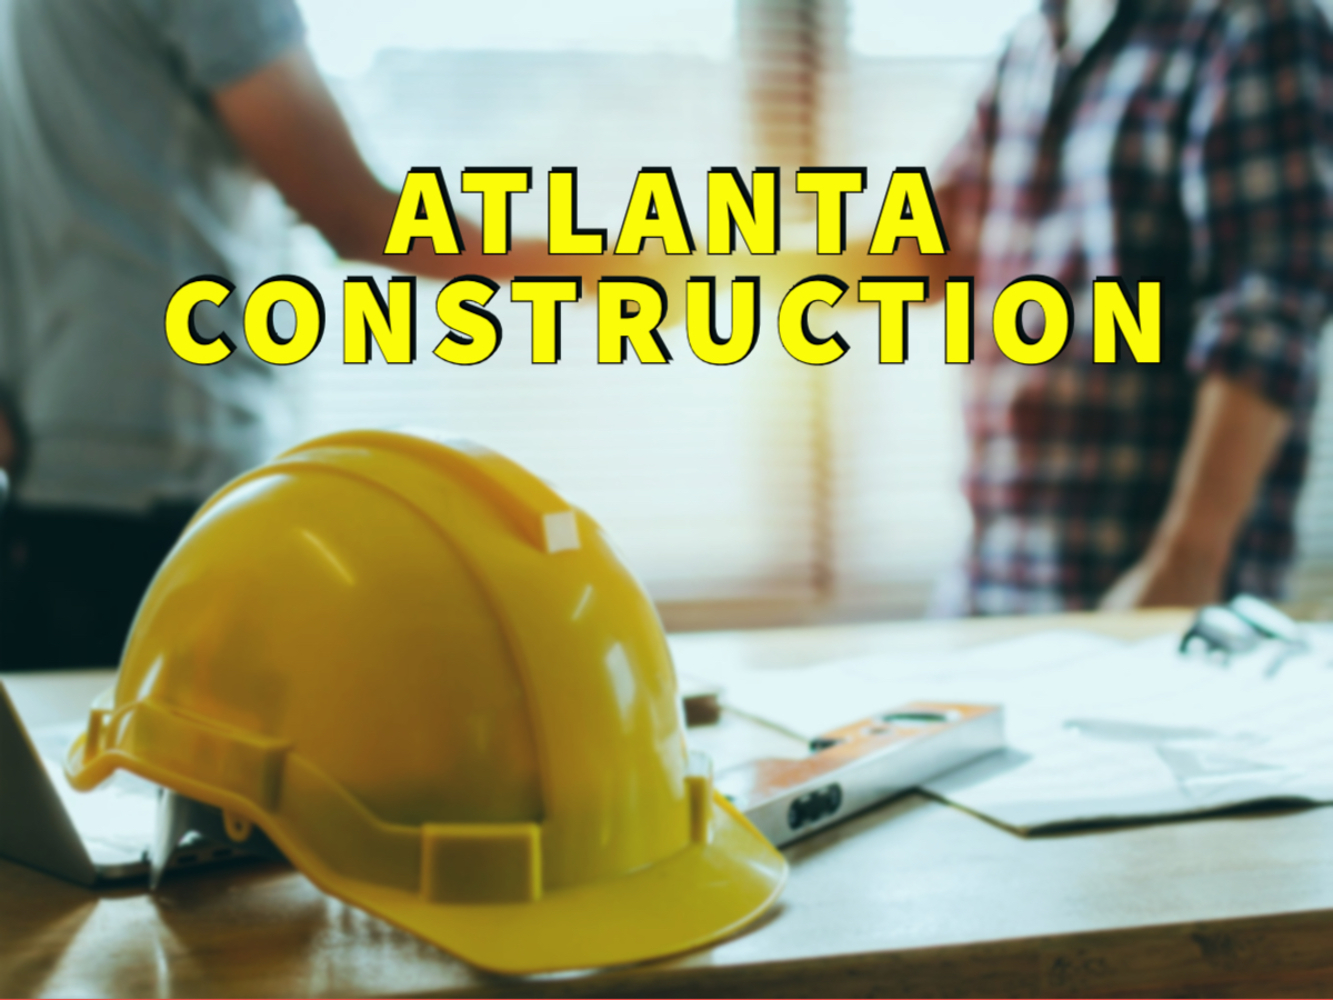 Atlanta construction written in yellow over two people shaking hands with construction hat in foreground